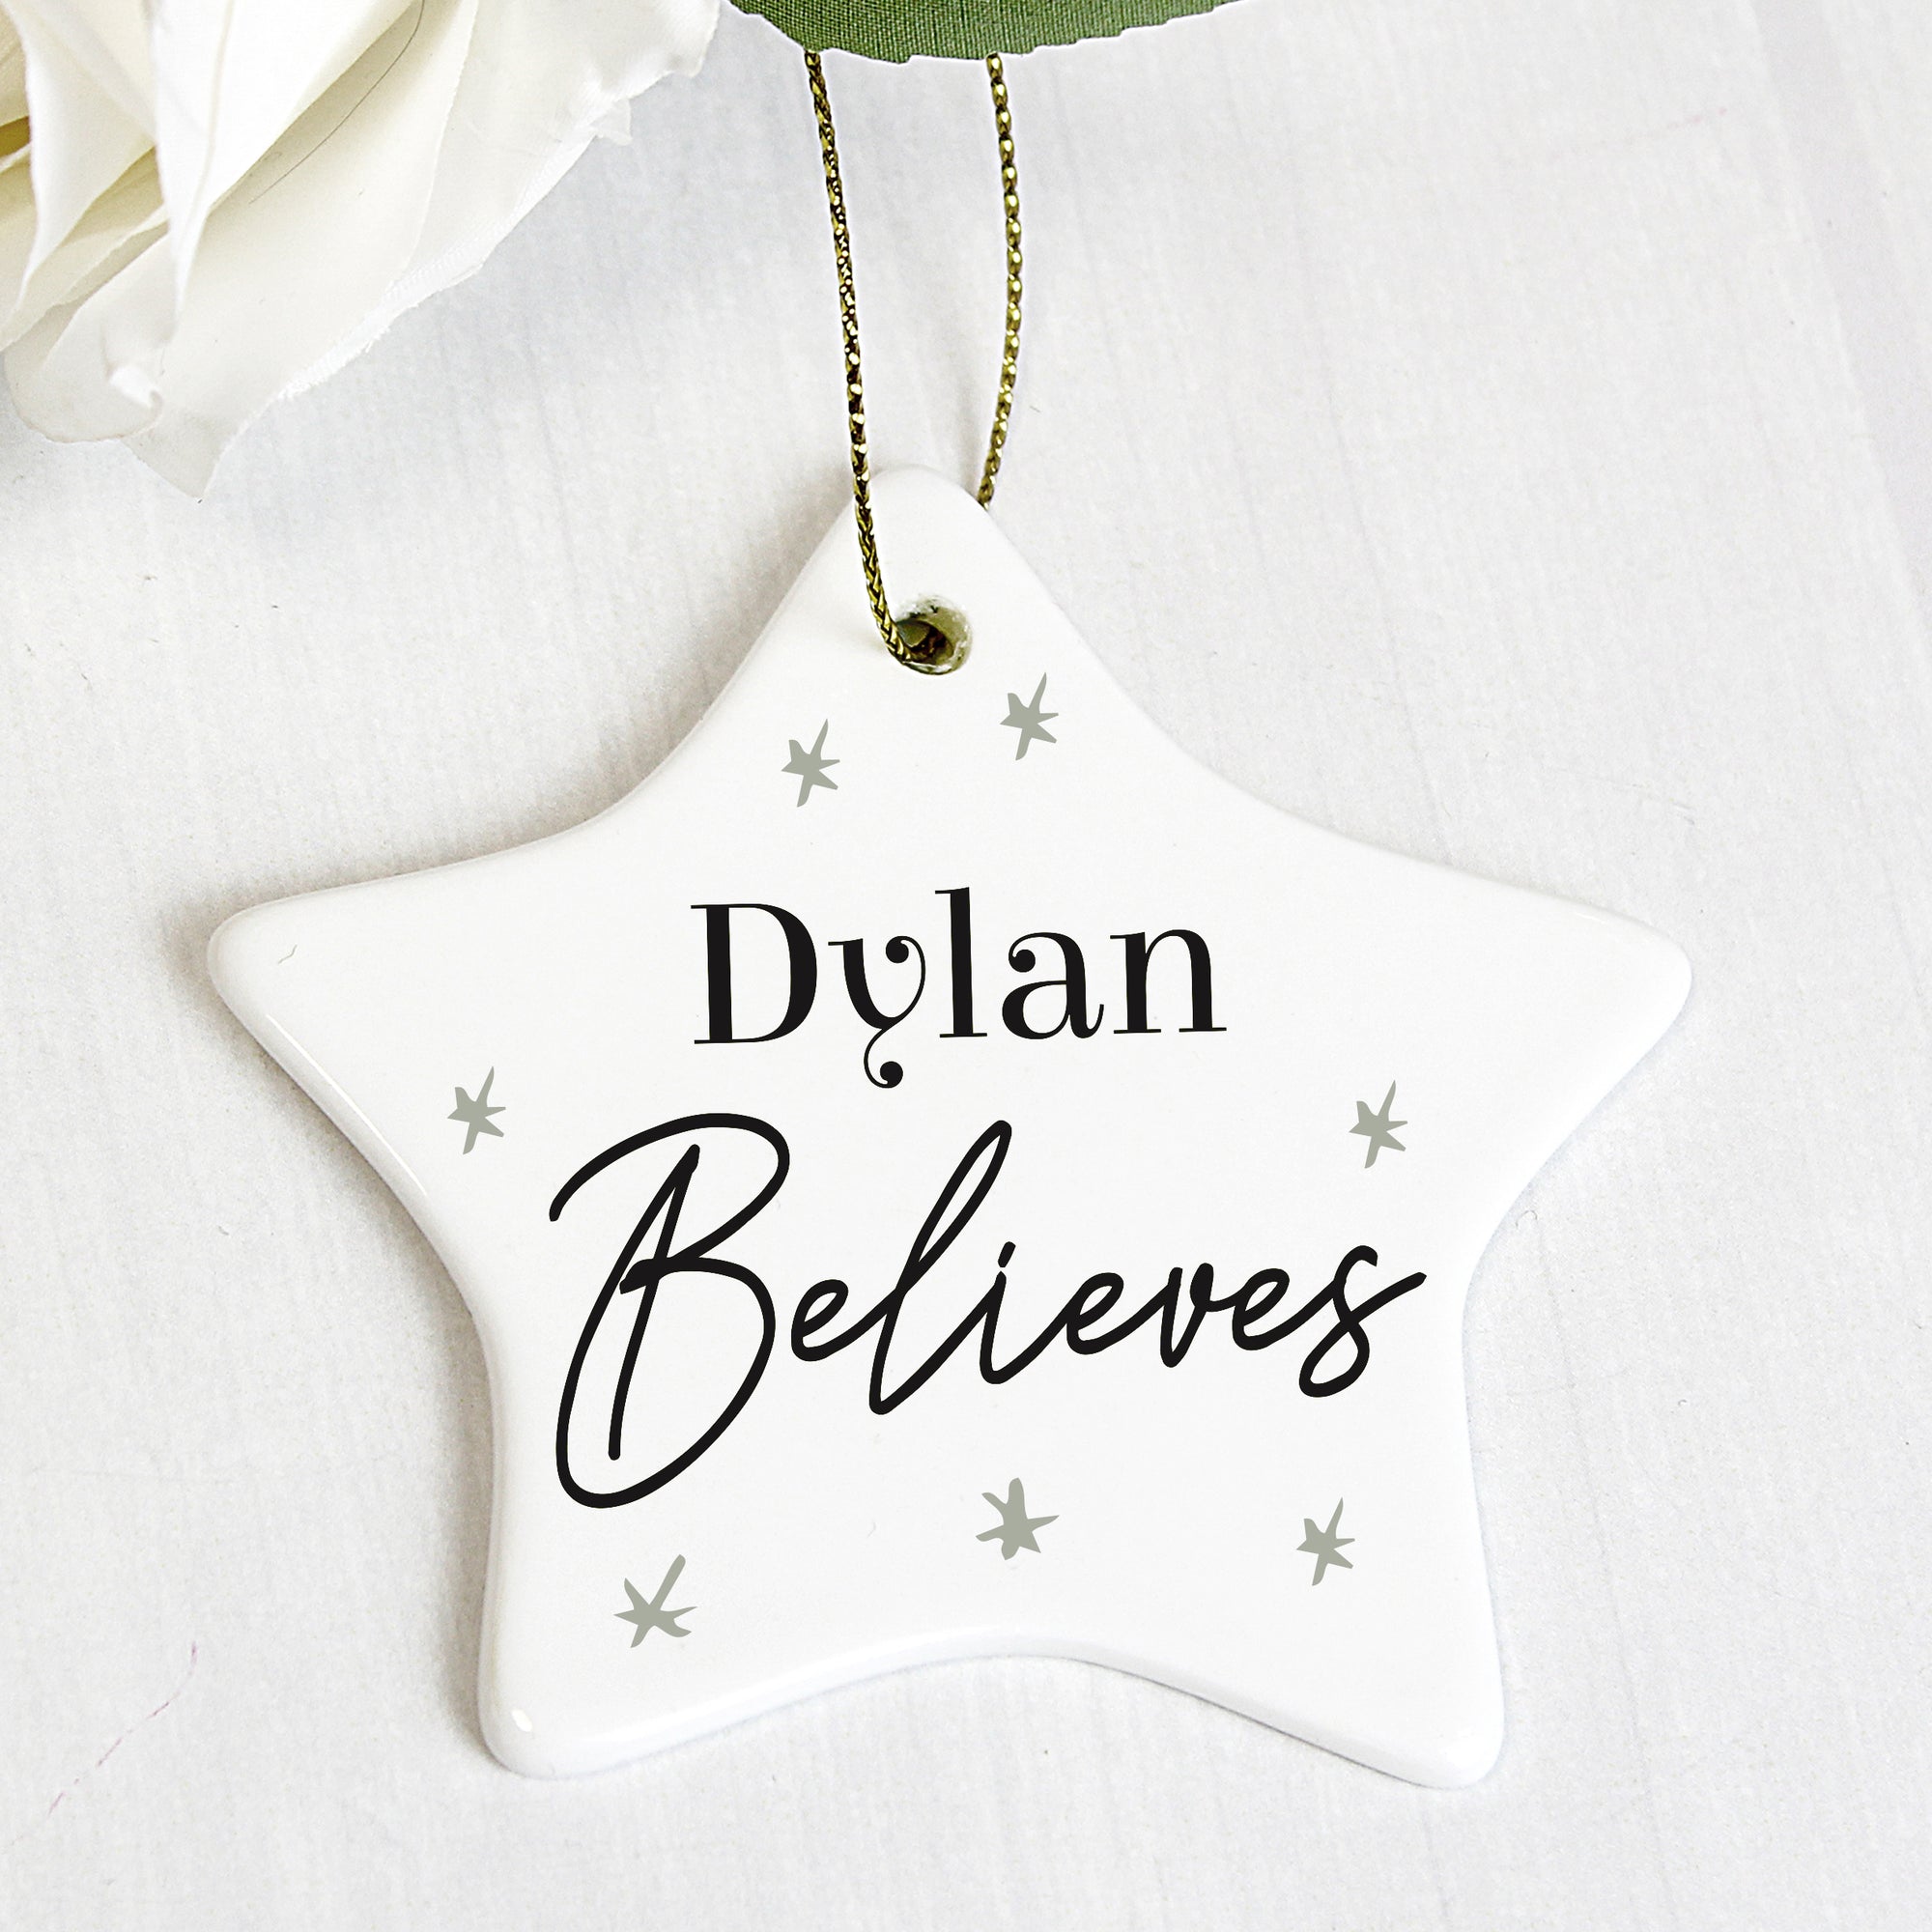 White ceramic star shaped Christmas decoration that comes with a string ready to hang. The decoration can be personalised with a name of up to 12 characters on the front followed by the word 'Believes'. The star has a small number of grey stars printed ono the front in a minimalistic hand drawn style.